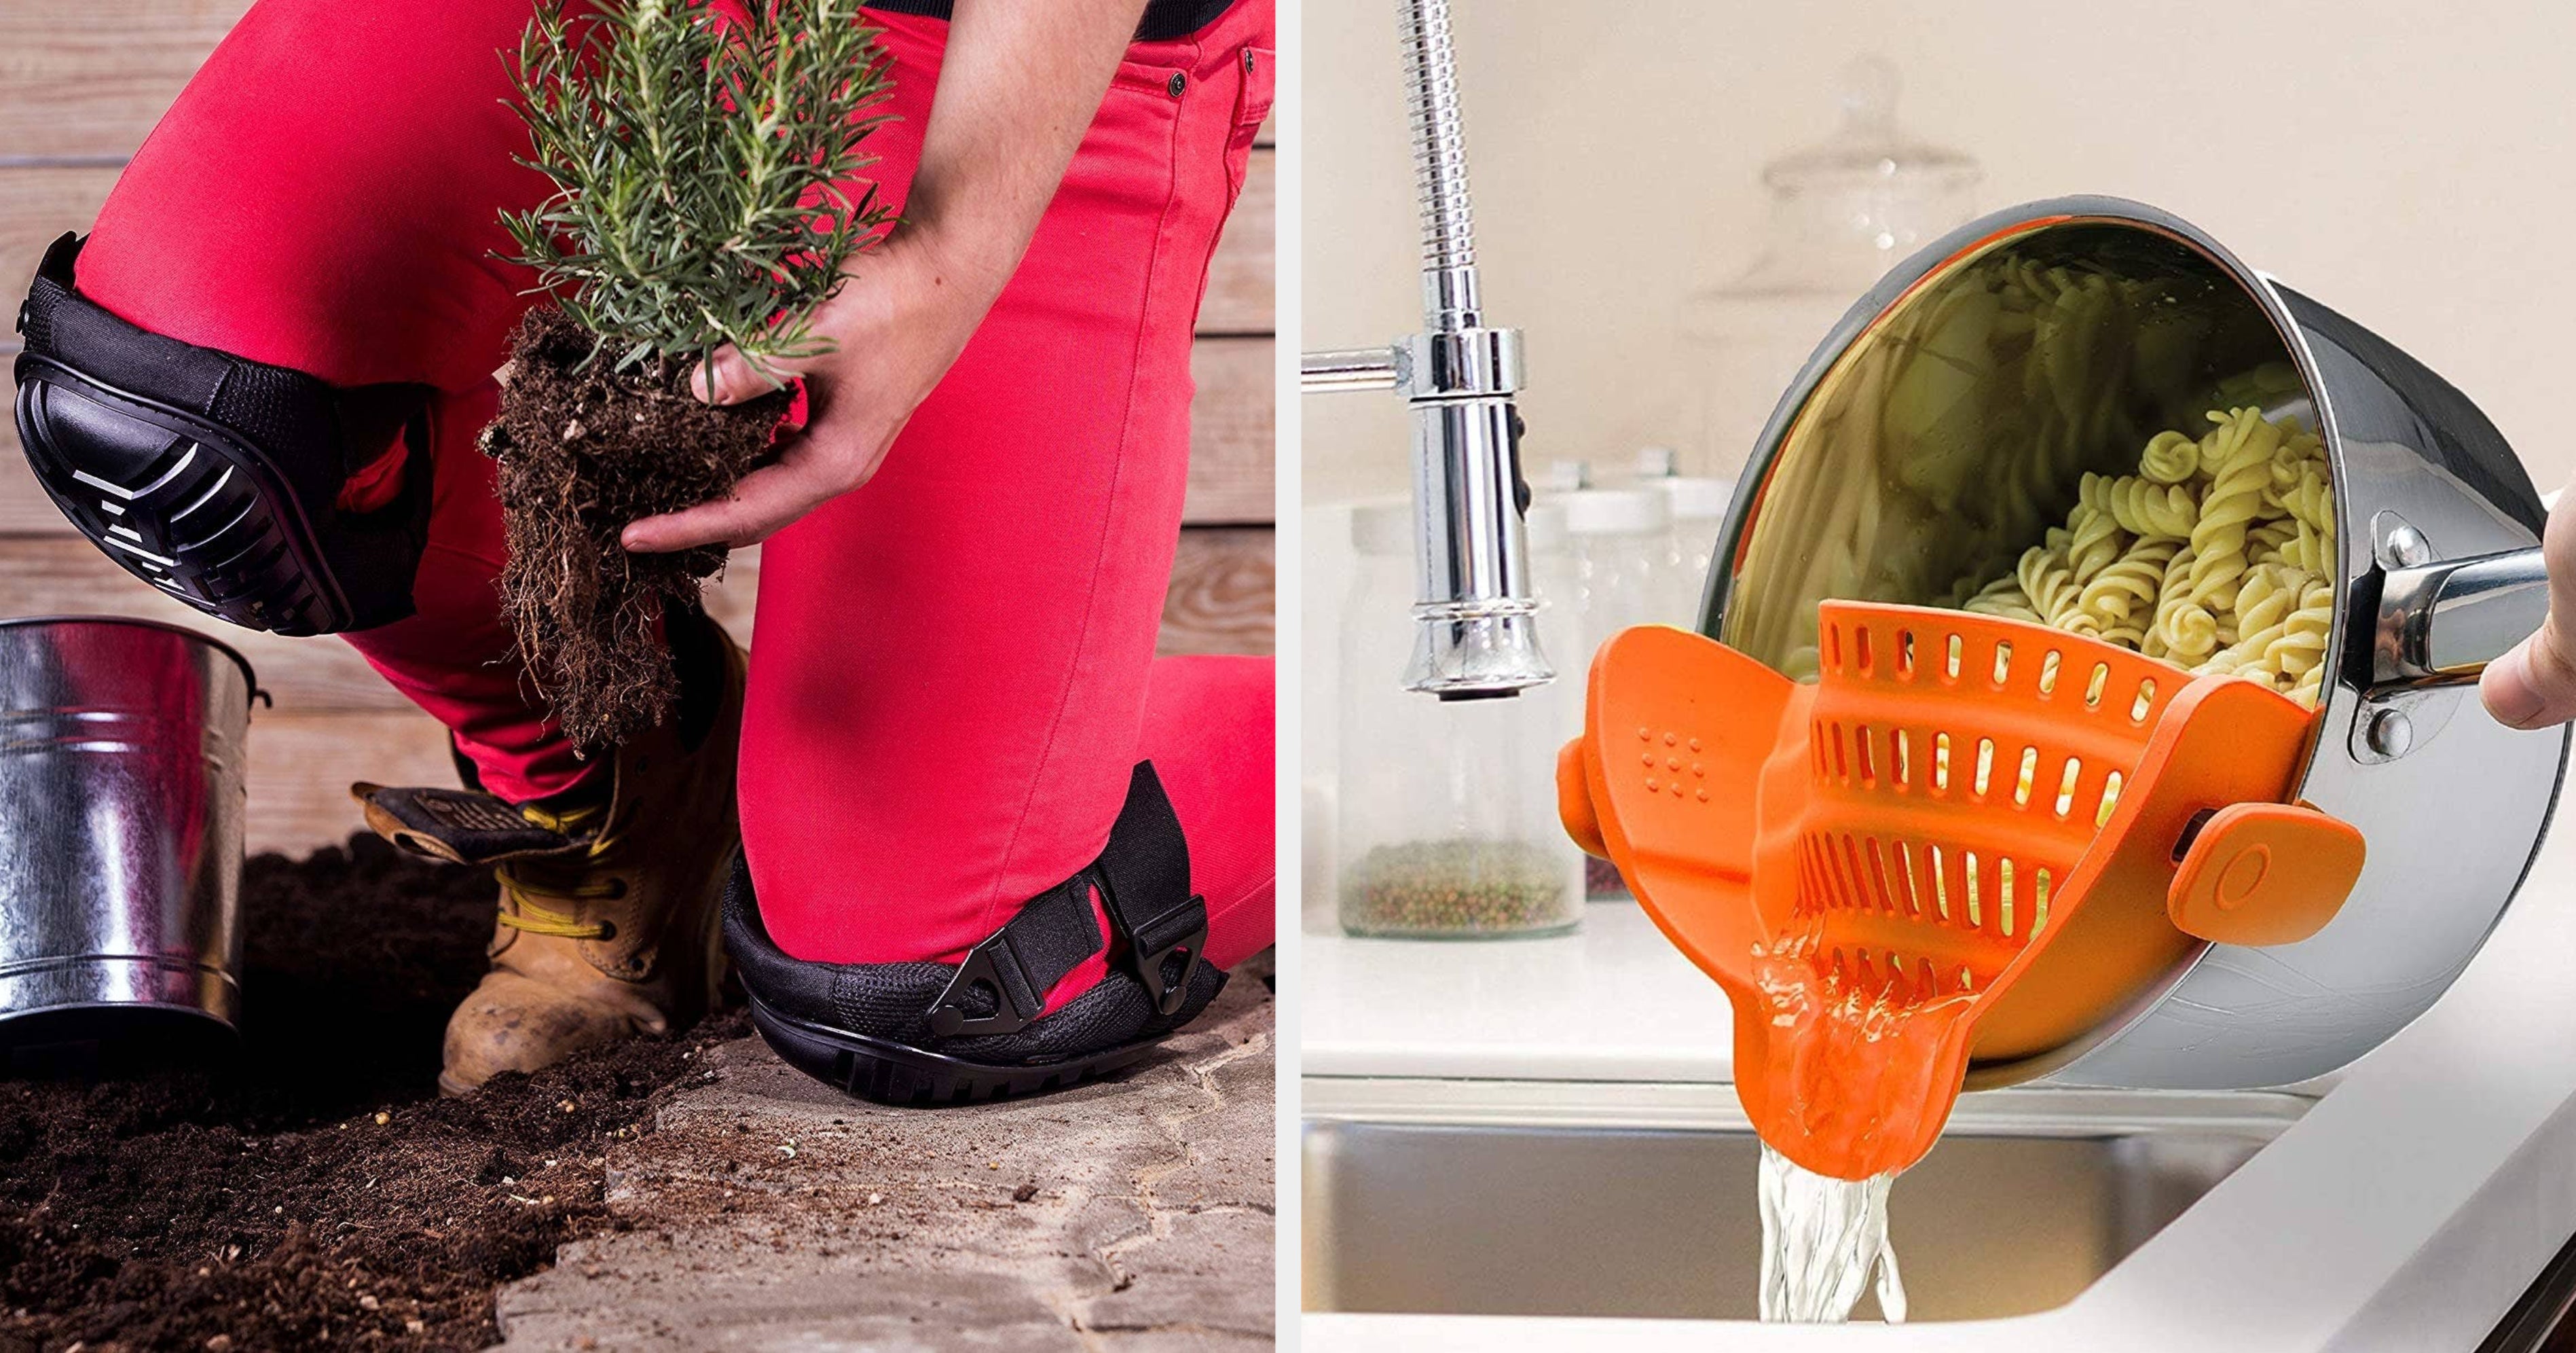 49 Useful Gifts to Buy for Practical, Hard-to-Shop-for People in 2021